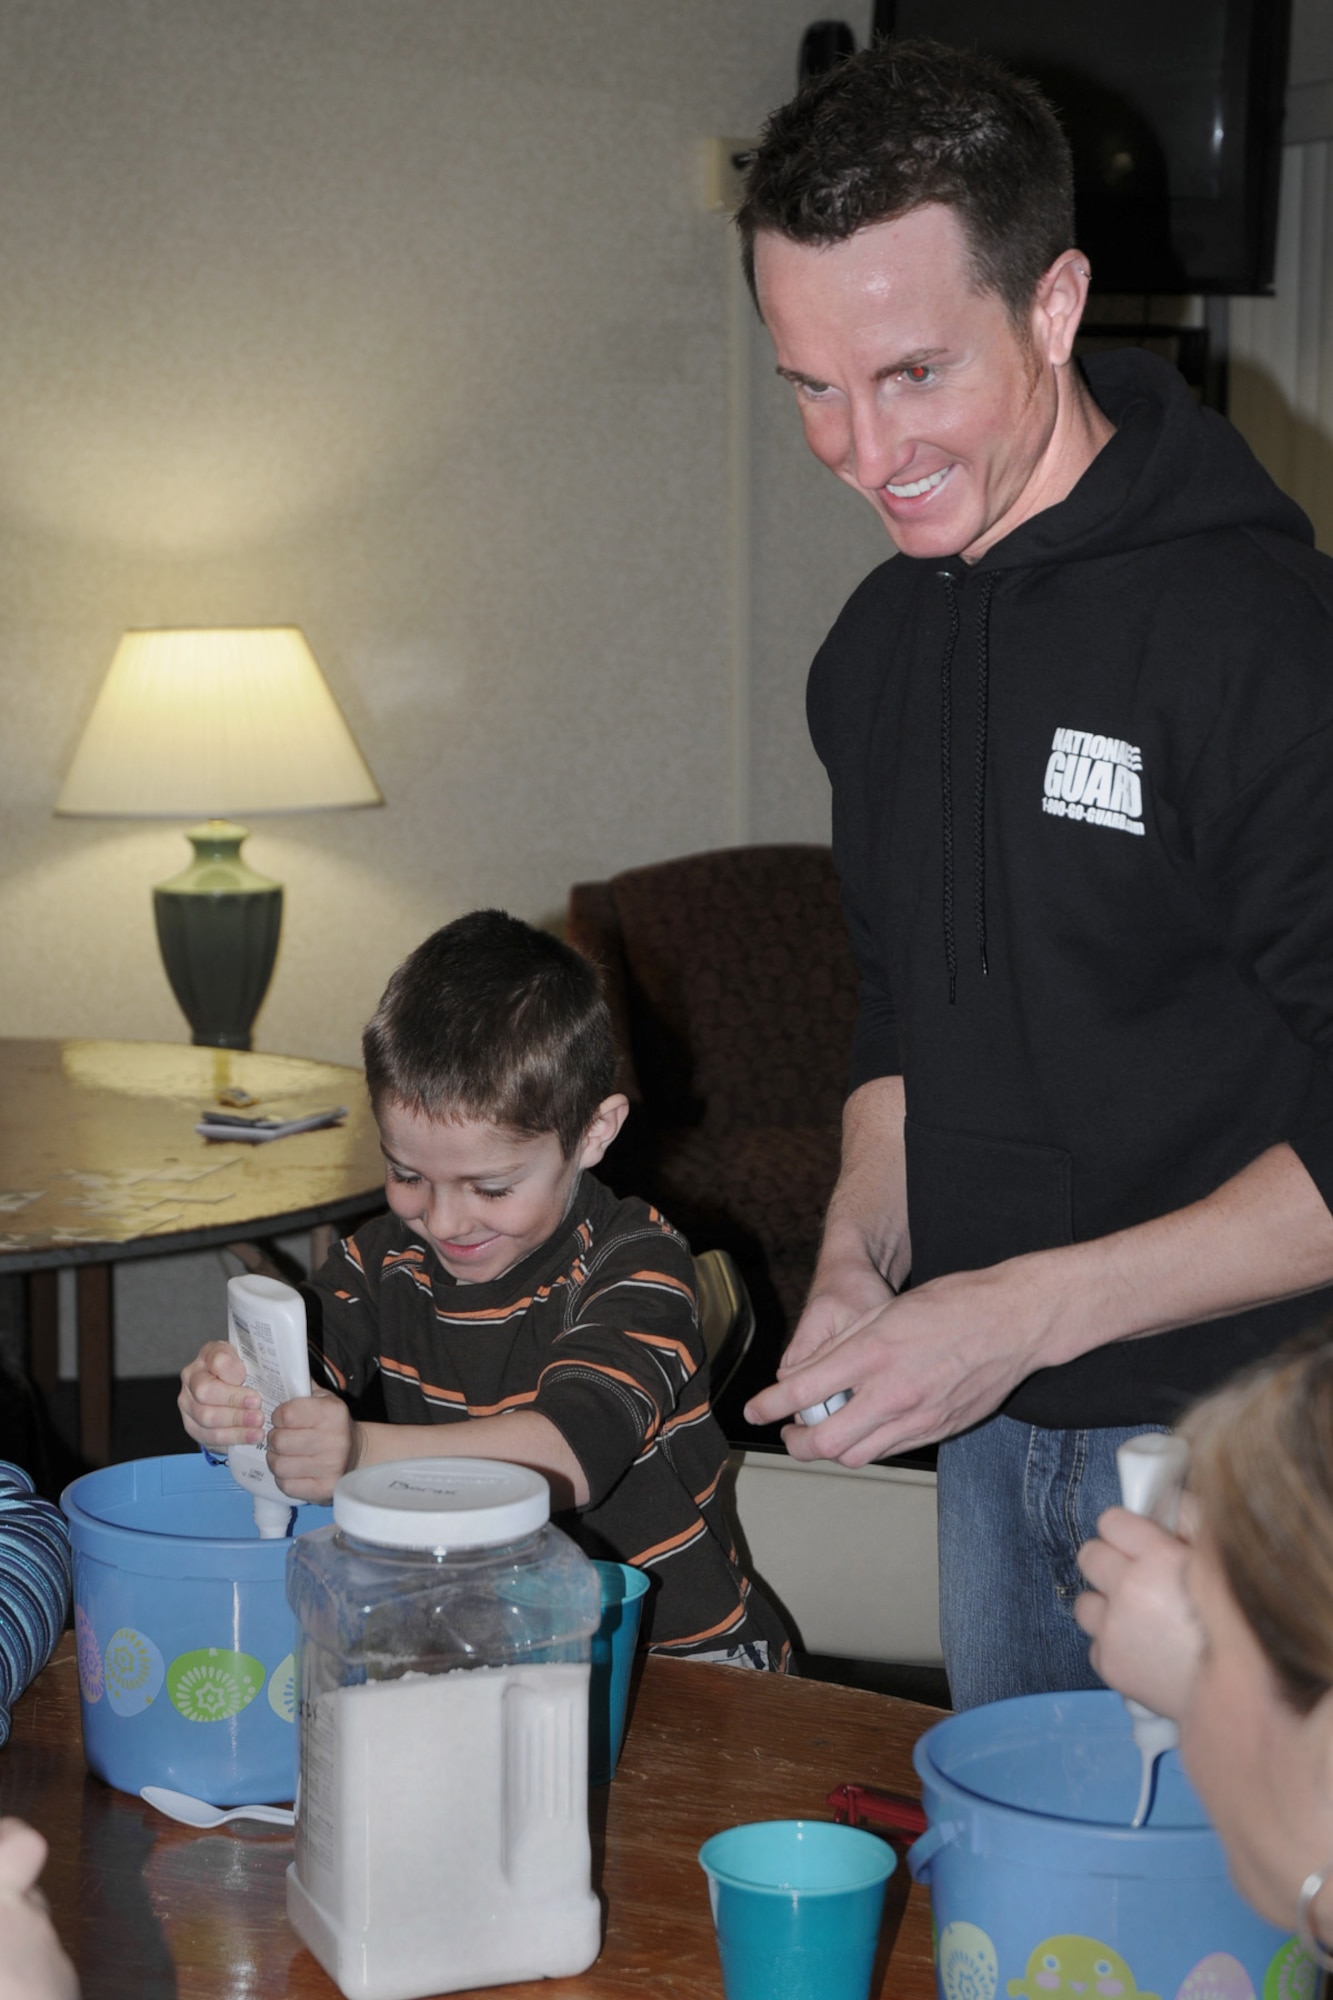 State Youth Coordinator Jeremy VanWyk (right) explains how to make ?slime? to children he is working with who?s parents are attending the Yellow Ribbon Event held at the Holiday Inn Airport in Des Moines, Iowa on March 6, 2010.  Childcare services were offered so parents could attend the event, which is designed to assist military members who have returned home from deployment and offer assistance to them as they transition back into civilian life.  (US Air Force photo/Staff Sgt. Linda E. Kephart)(Released)